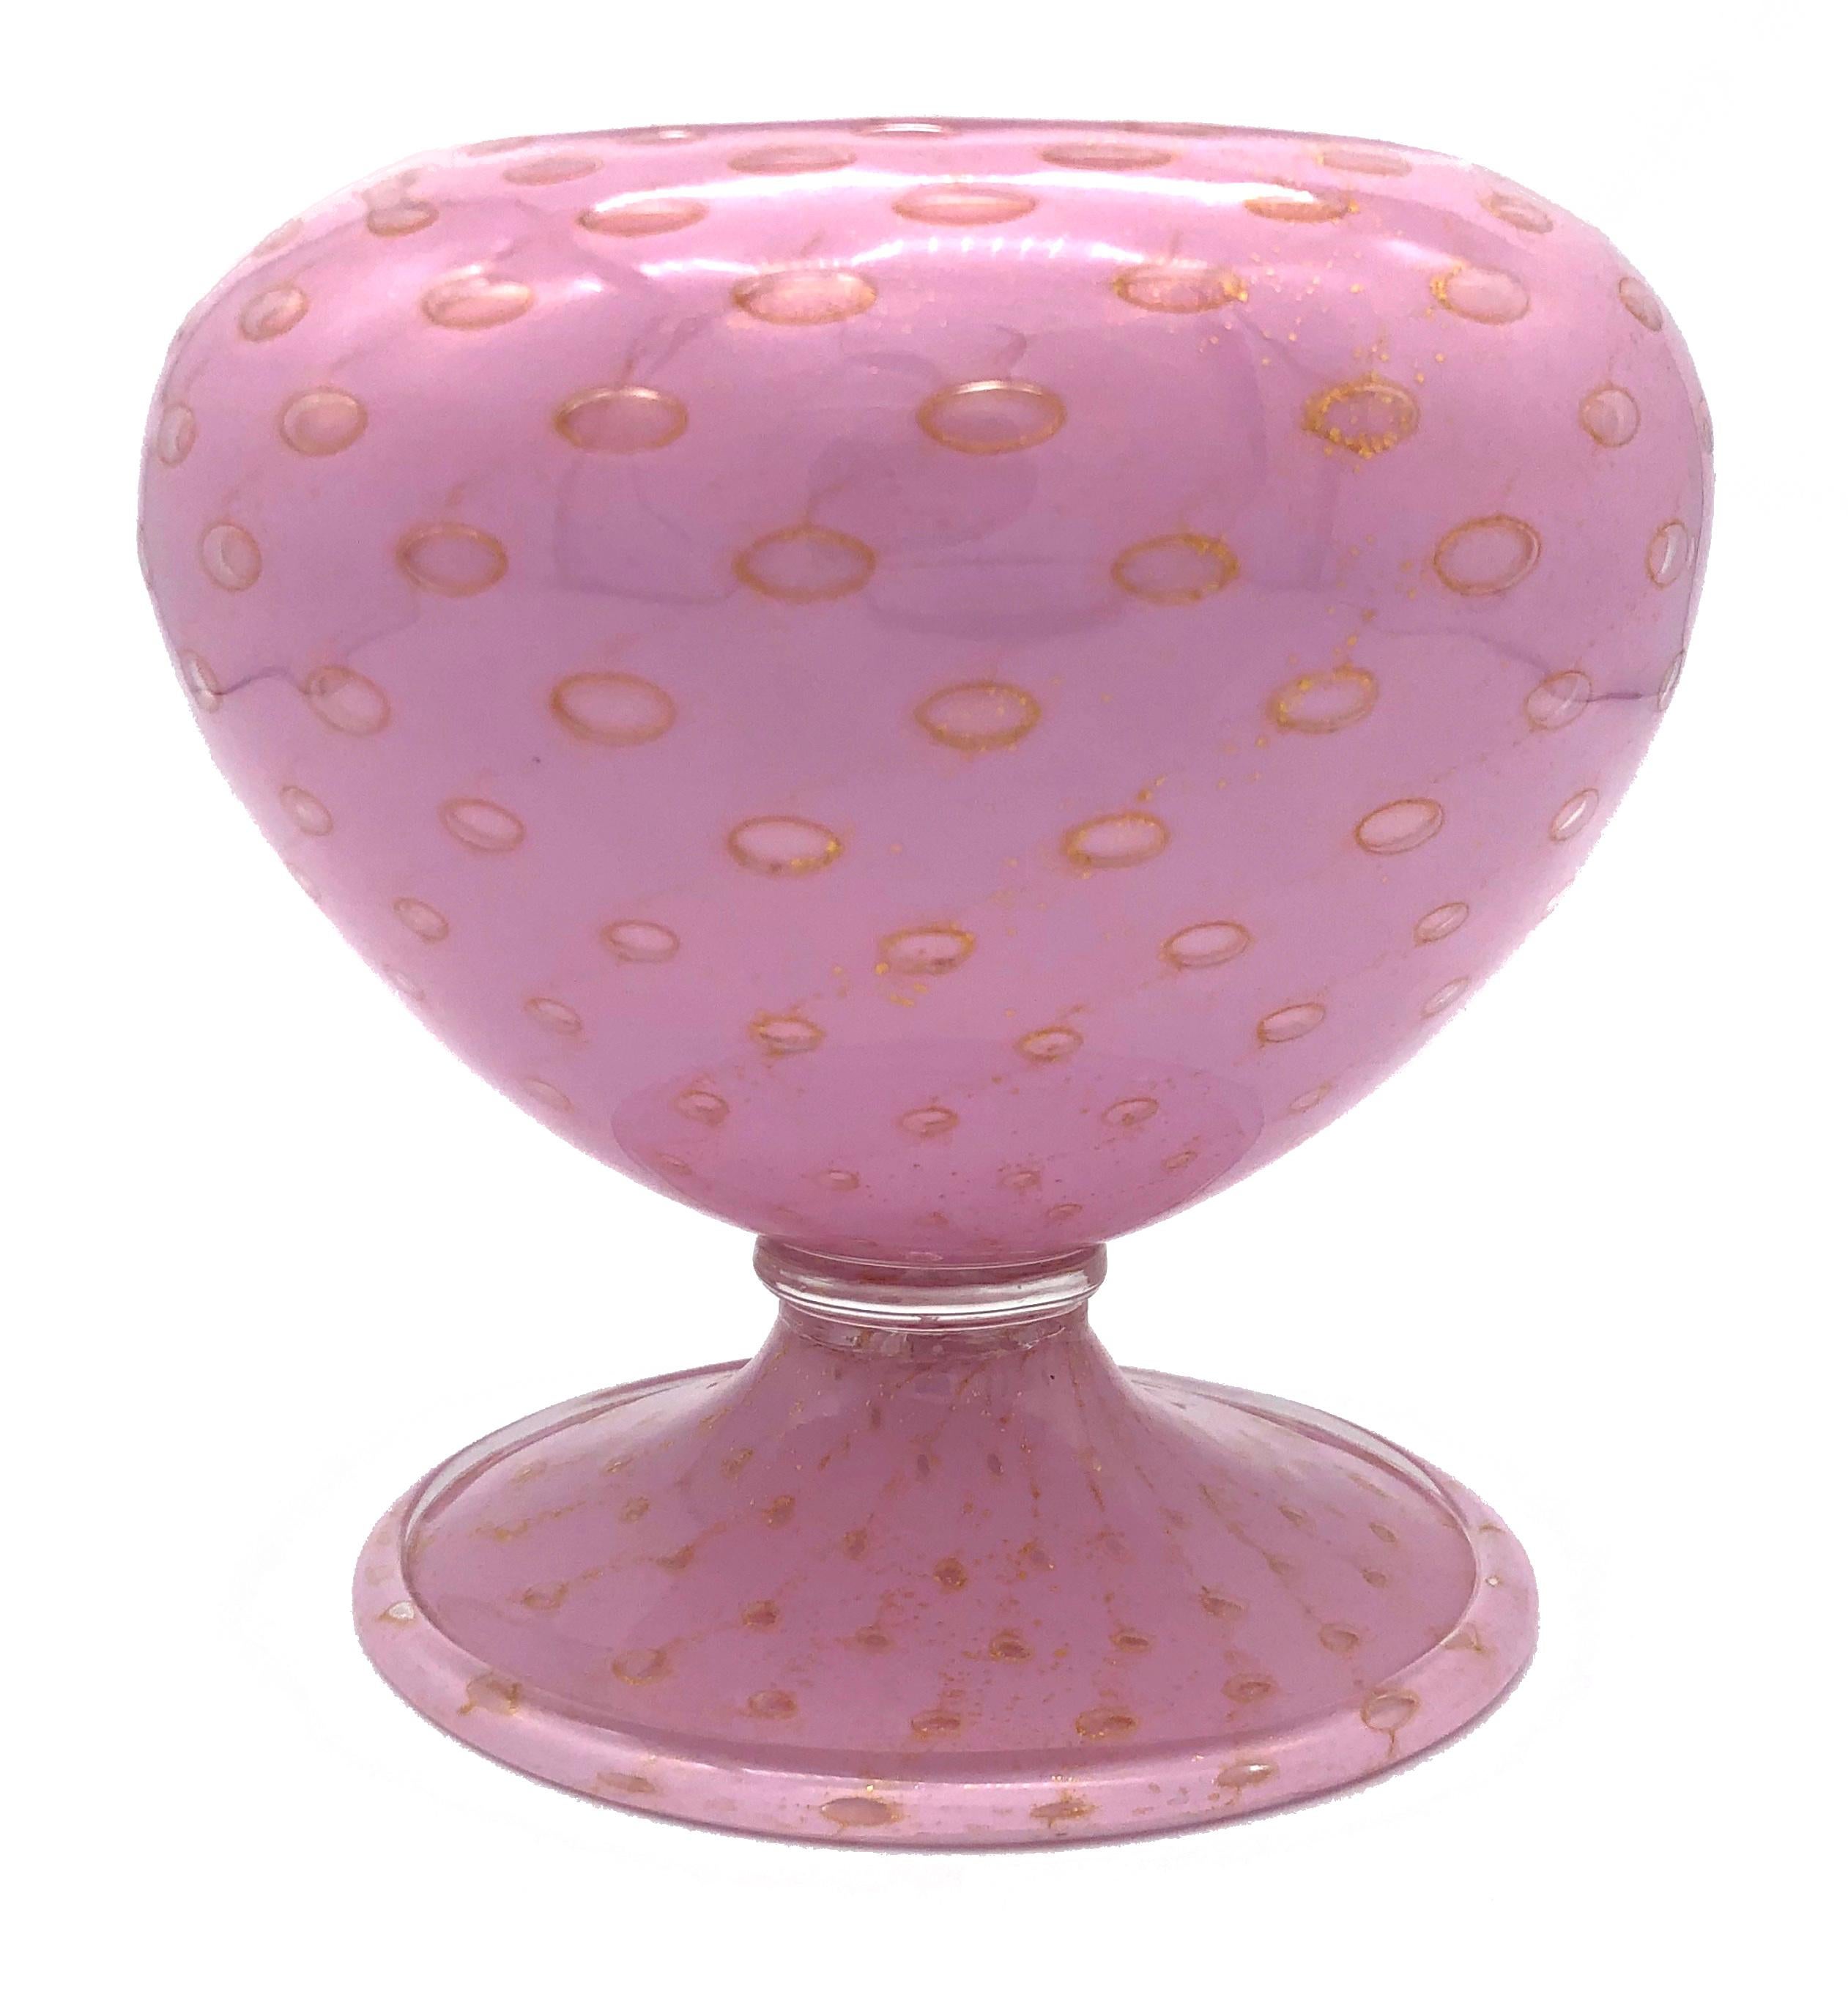 Wonderful rich pink art glass vase by Salviati & Co, Italy with the original gold colored paper label, 20th century. The elegant design is enhanced by golden bubbles decreasing in size from top to bottom.